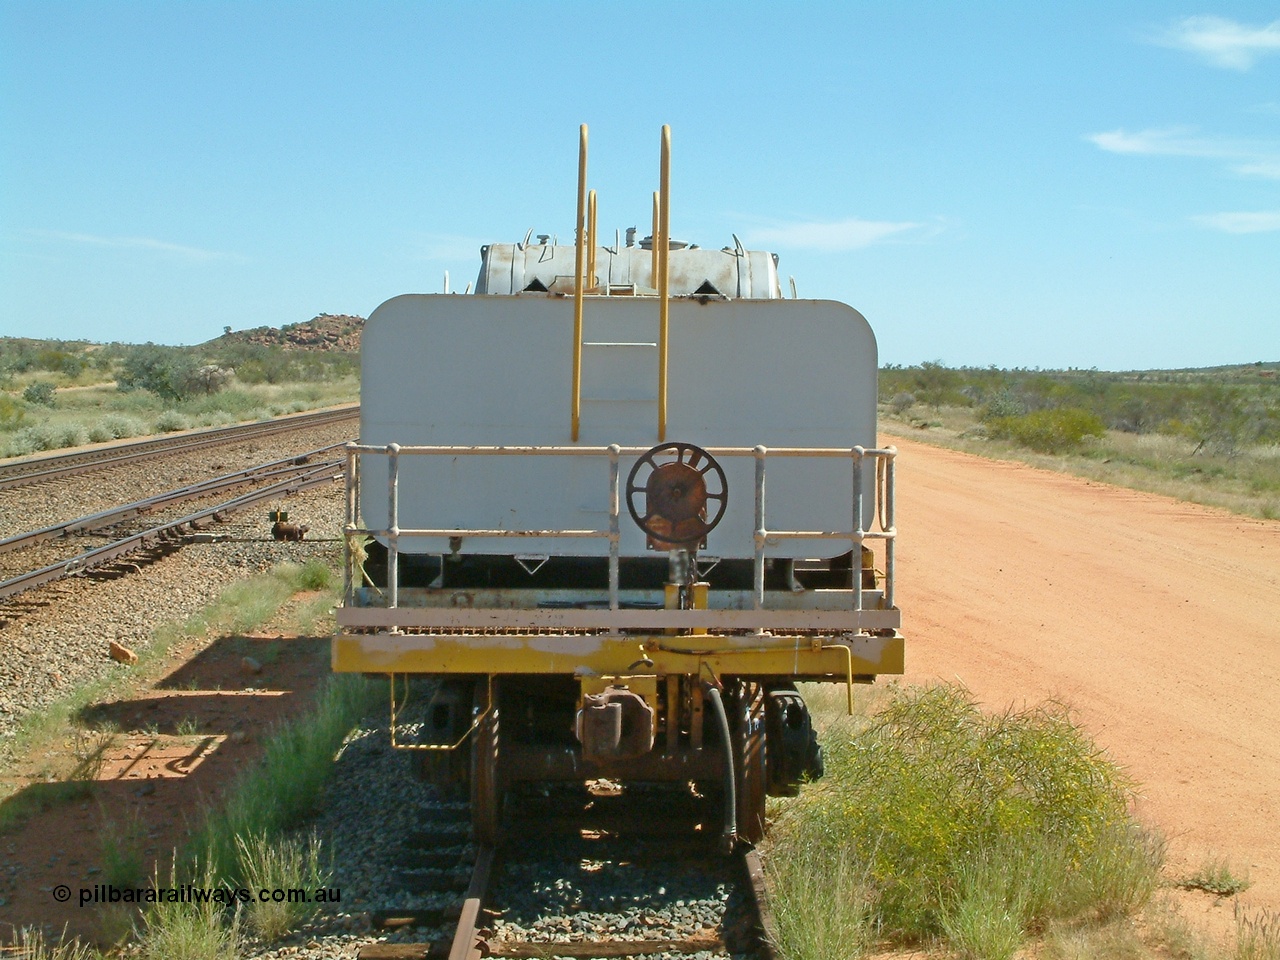 040419 102104
Abydos back track, riveted flat waggon 202 with three water tanks fitted, view of handbrake end, originally part of the 'camp train', modified by Mt Newman Mining railway workshops.
Keywords: BHP-flat-waggon;